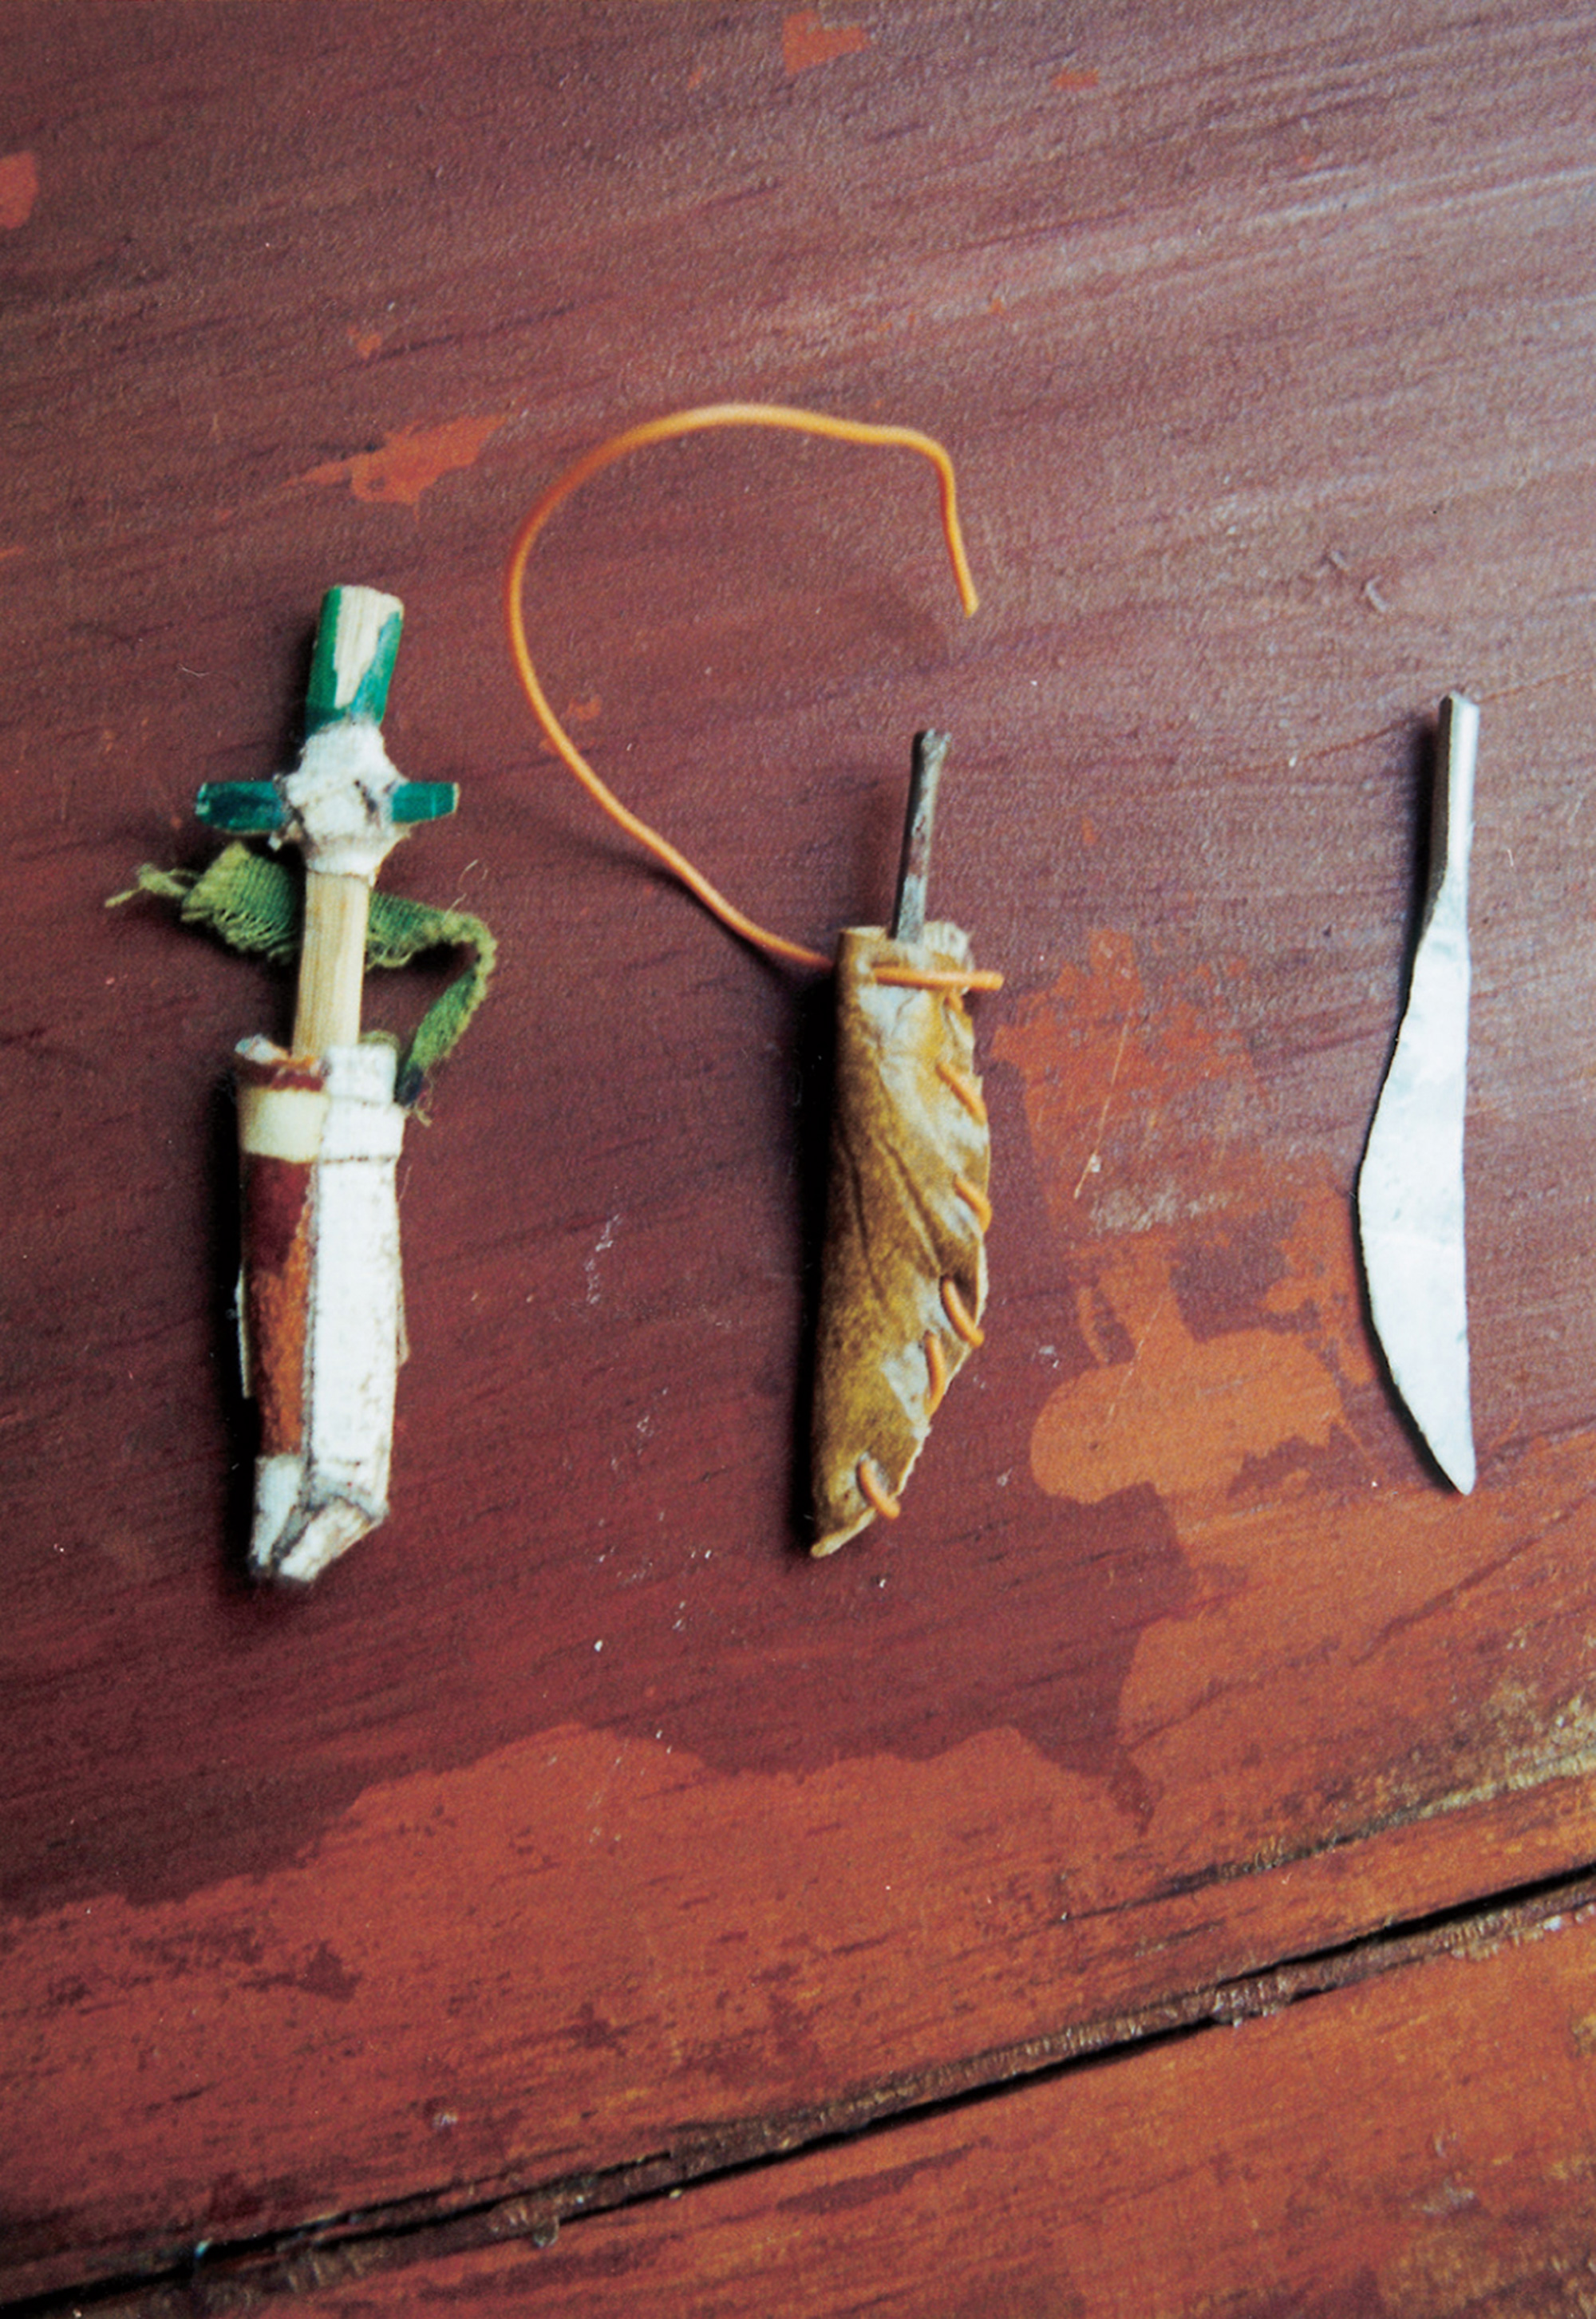 Lot of three daggers.  
1. Steel dagger made of a round-headed nail, half of which has been hammered flat to make a straight, narrow blade; the sheath is faux leather, folded and stitched up one side with telephone wire, the end of which is left loose to serve as a strap. 2. Aluminum dagger made of a length of wire hammered flat. 3. Bamboo dagger, whittled flat and tapered toward the tip. The grip is colored green on one side; a short hand-guard is affixed to the blade with white medical cloth tape. The blade fits snugly inside its sheath, which is real leather folded and joined with more cloth tape. A thin strip of fraying green cloth is taped to the top of the sheath; this once formed a loop for hanging, but is torn close to the sheath on one end. Daggers, not all of them as finely crafted as these, were de rigueur for the heroes and heroines (above all the spunky Aina) of the Doll Games’ “Pirate” and “Outlaw” scenarios.